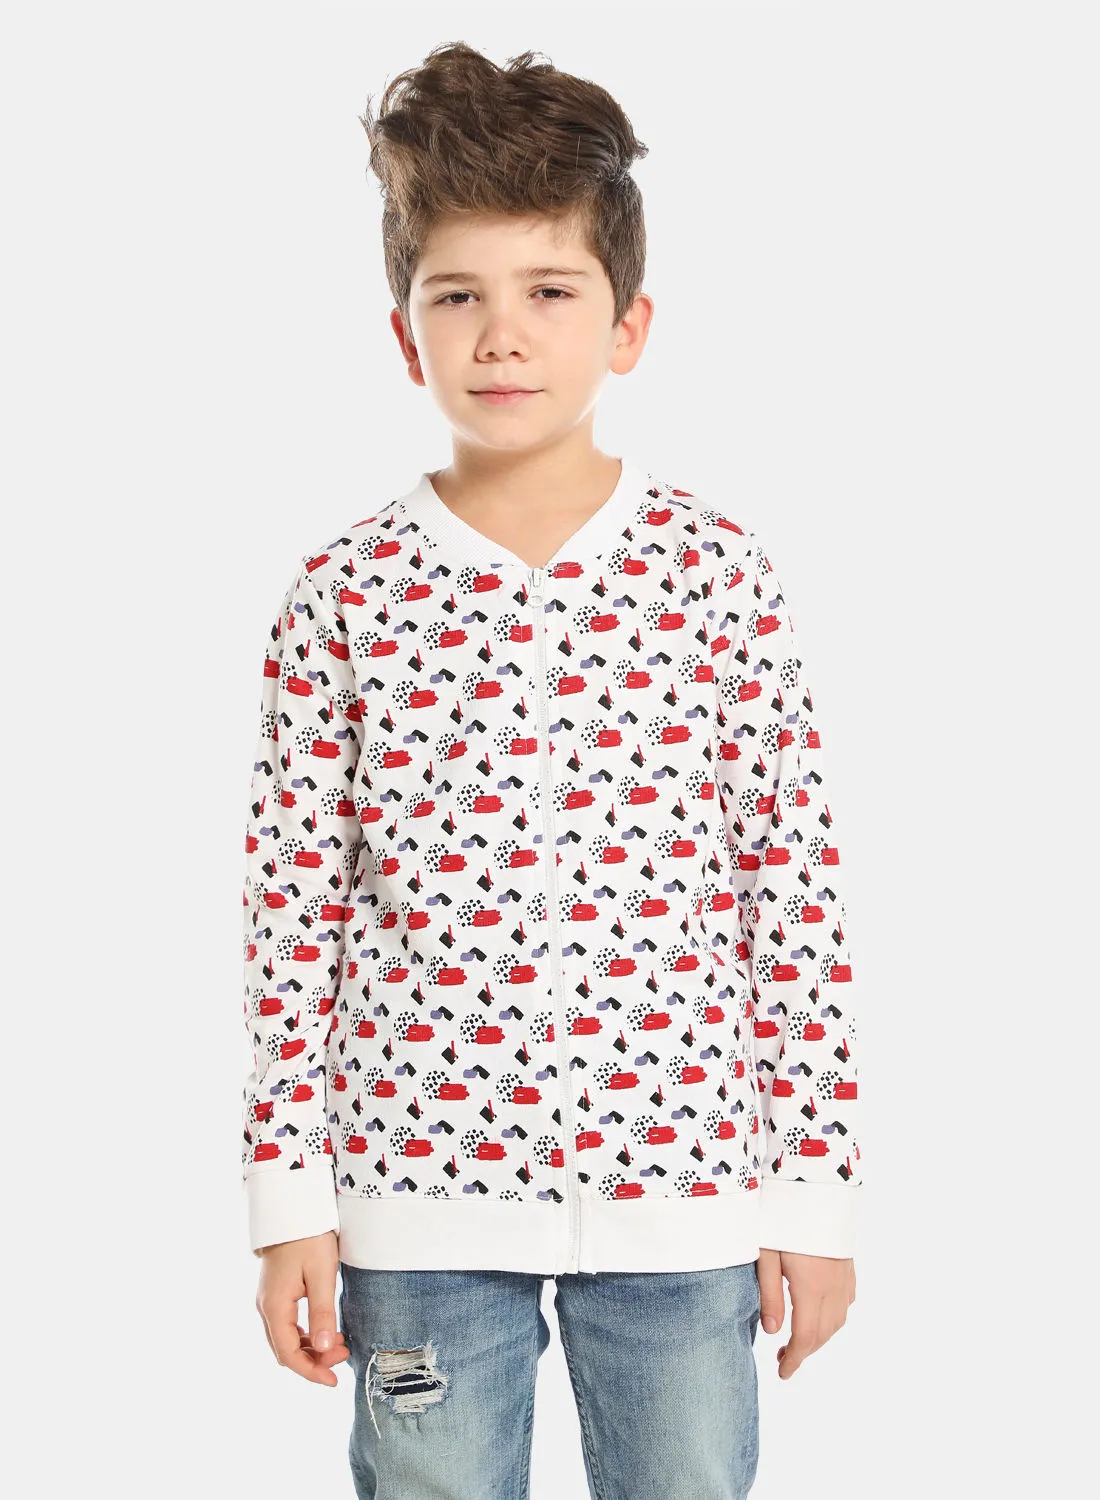 QUWA Boys All-Over Print Zip-Up Jacket Red/White/Black